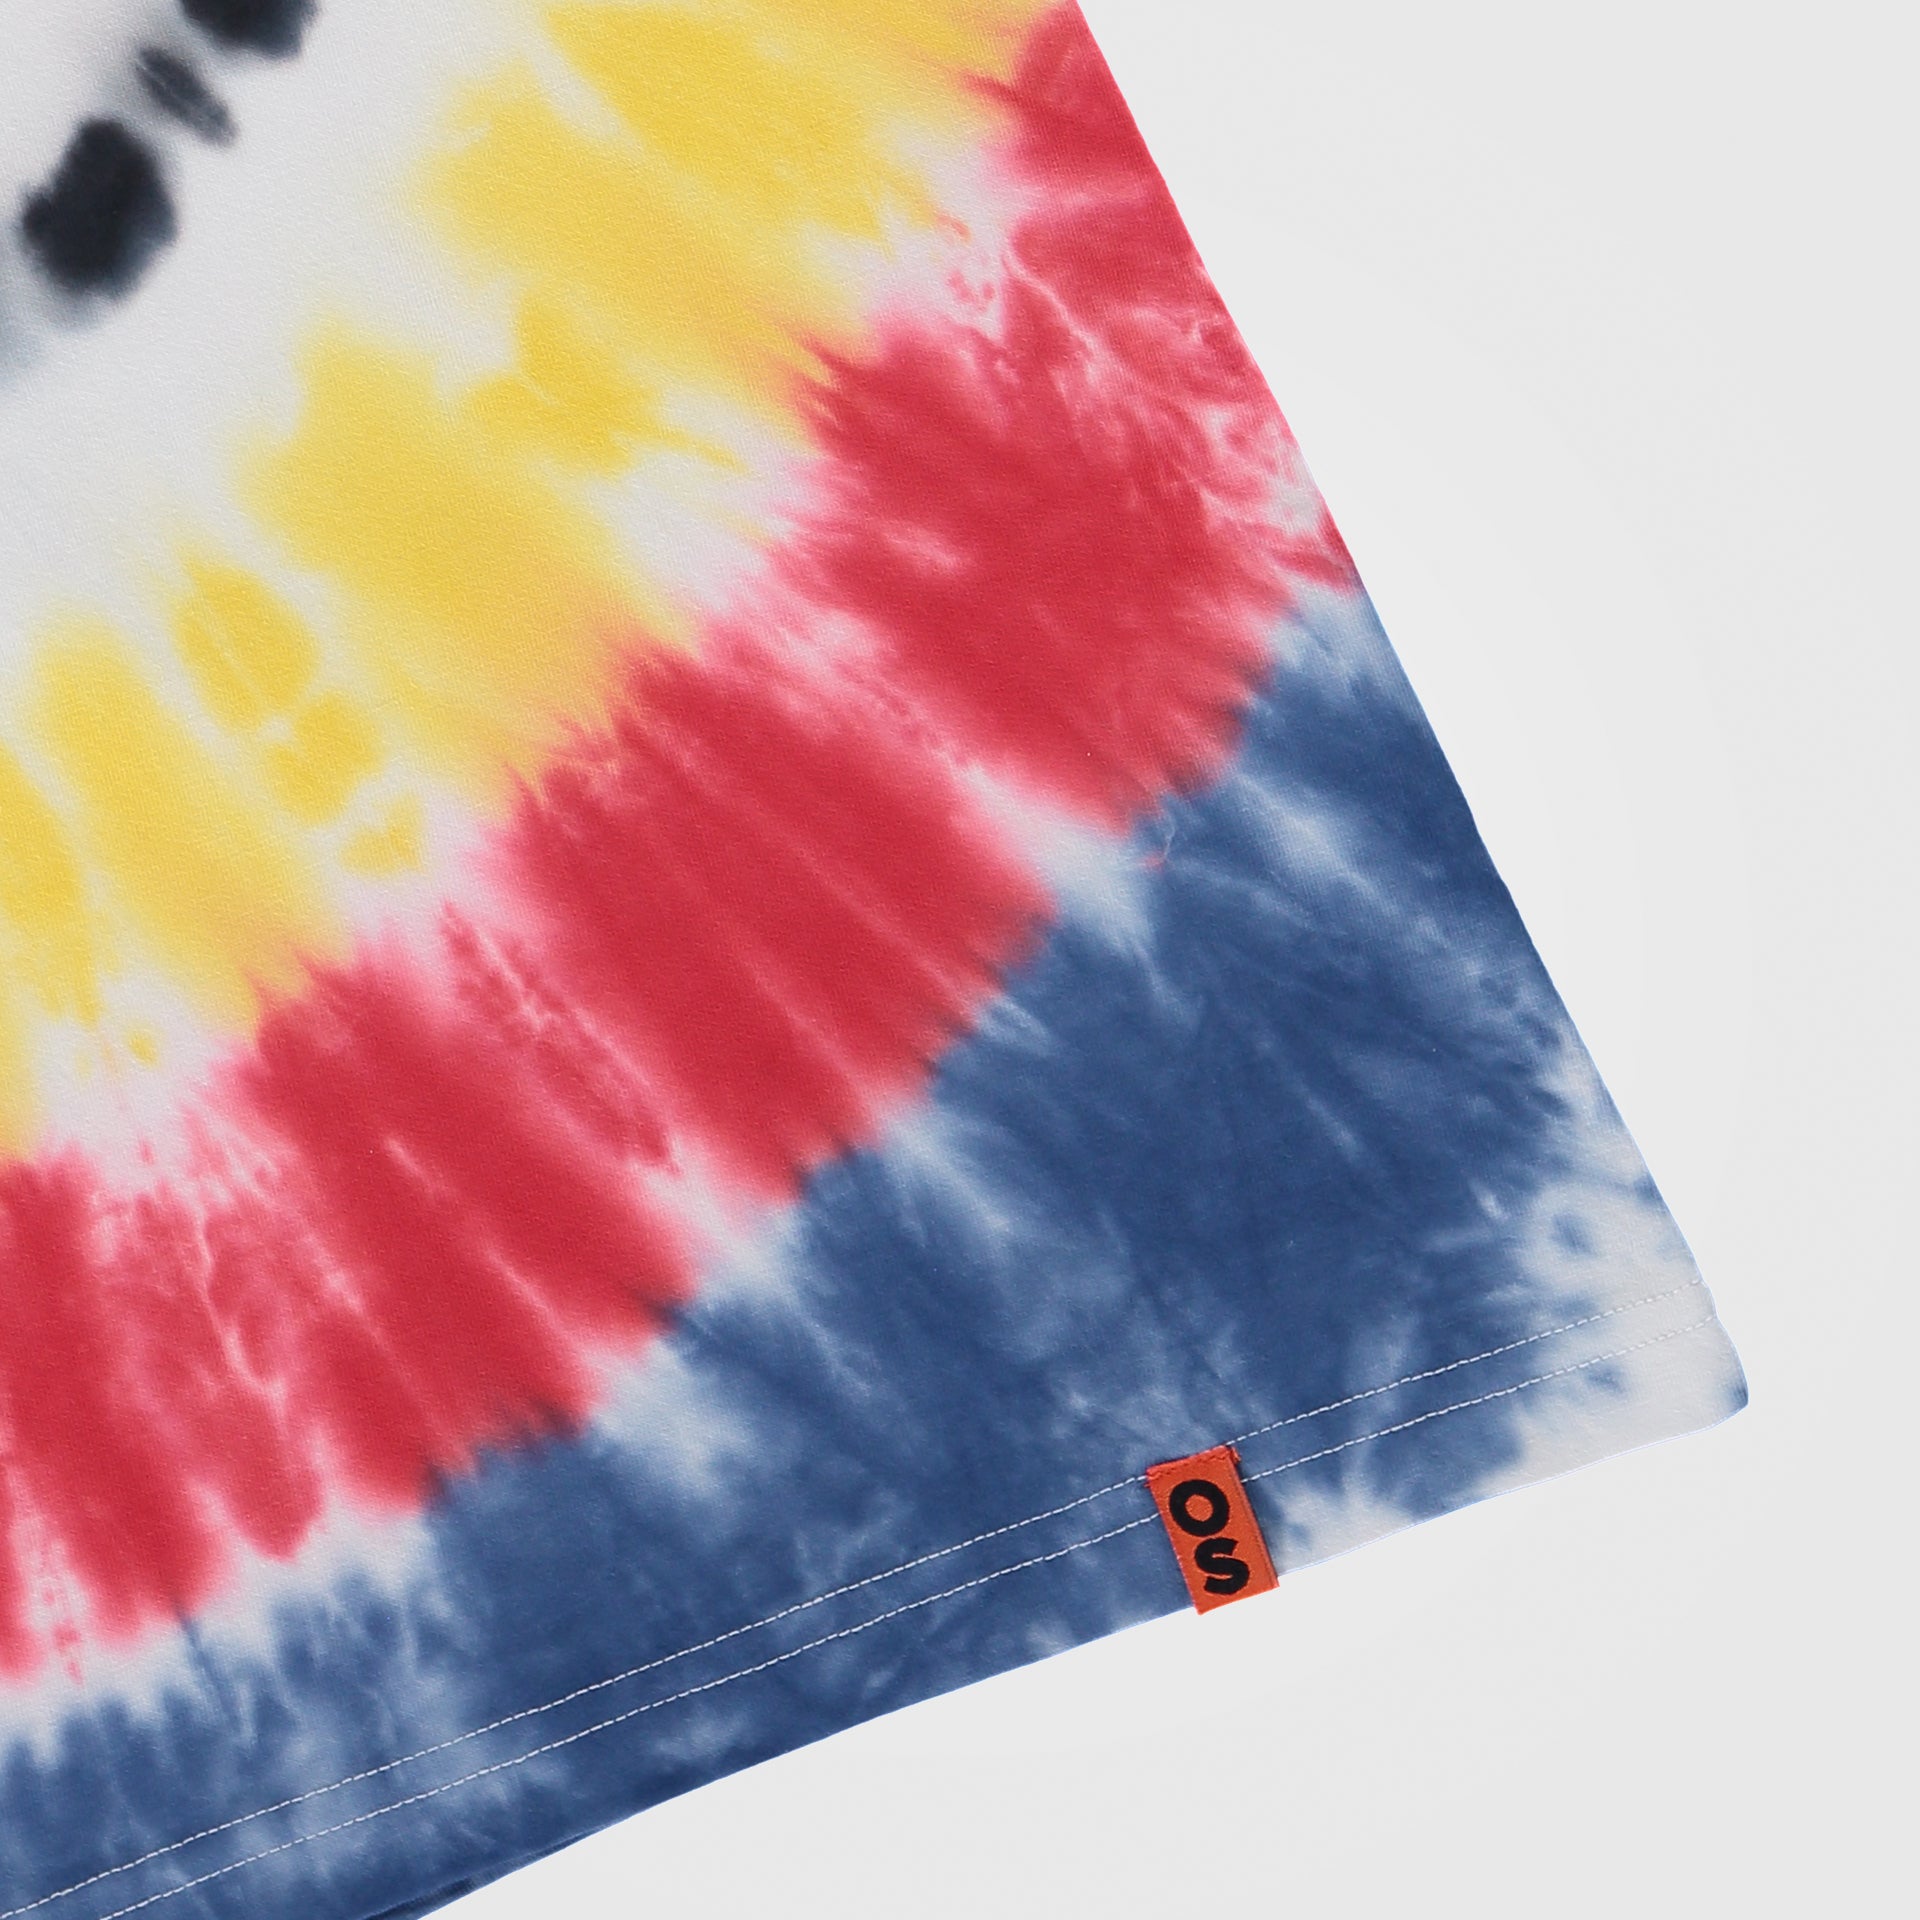 Multi Color Tie & Dye Stay Away Cotton T-Shirt From Official Secret